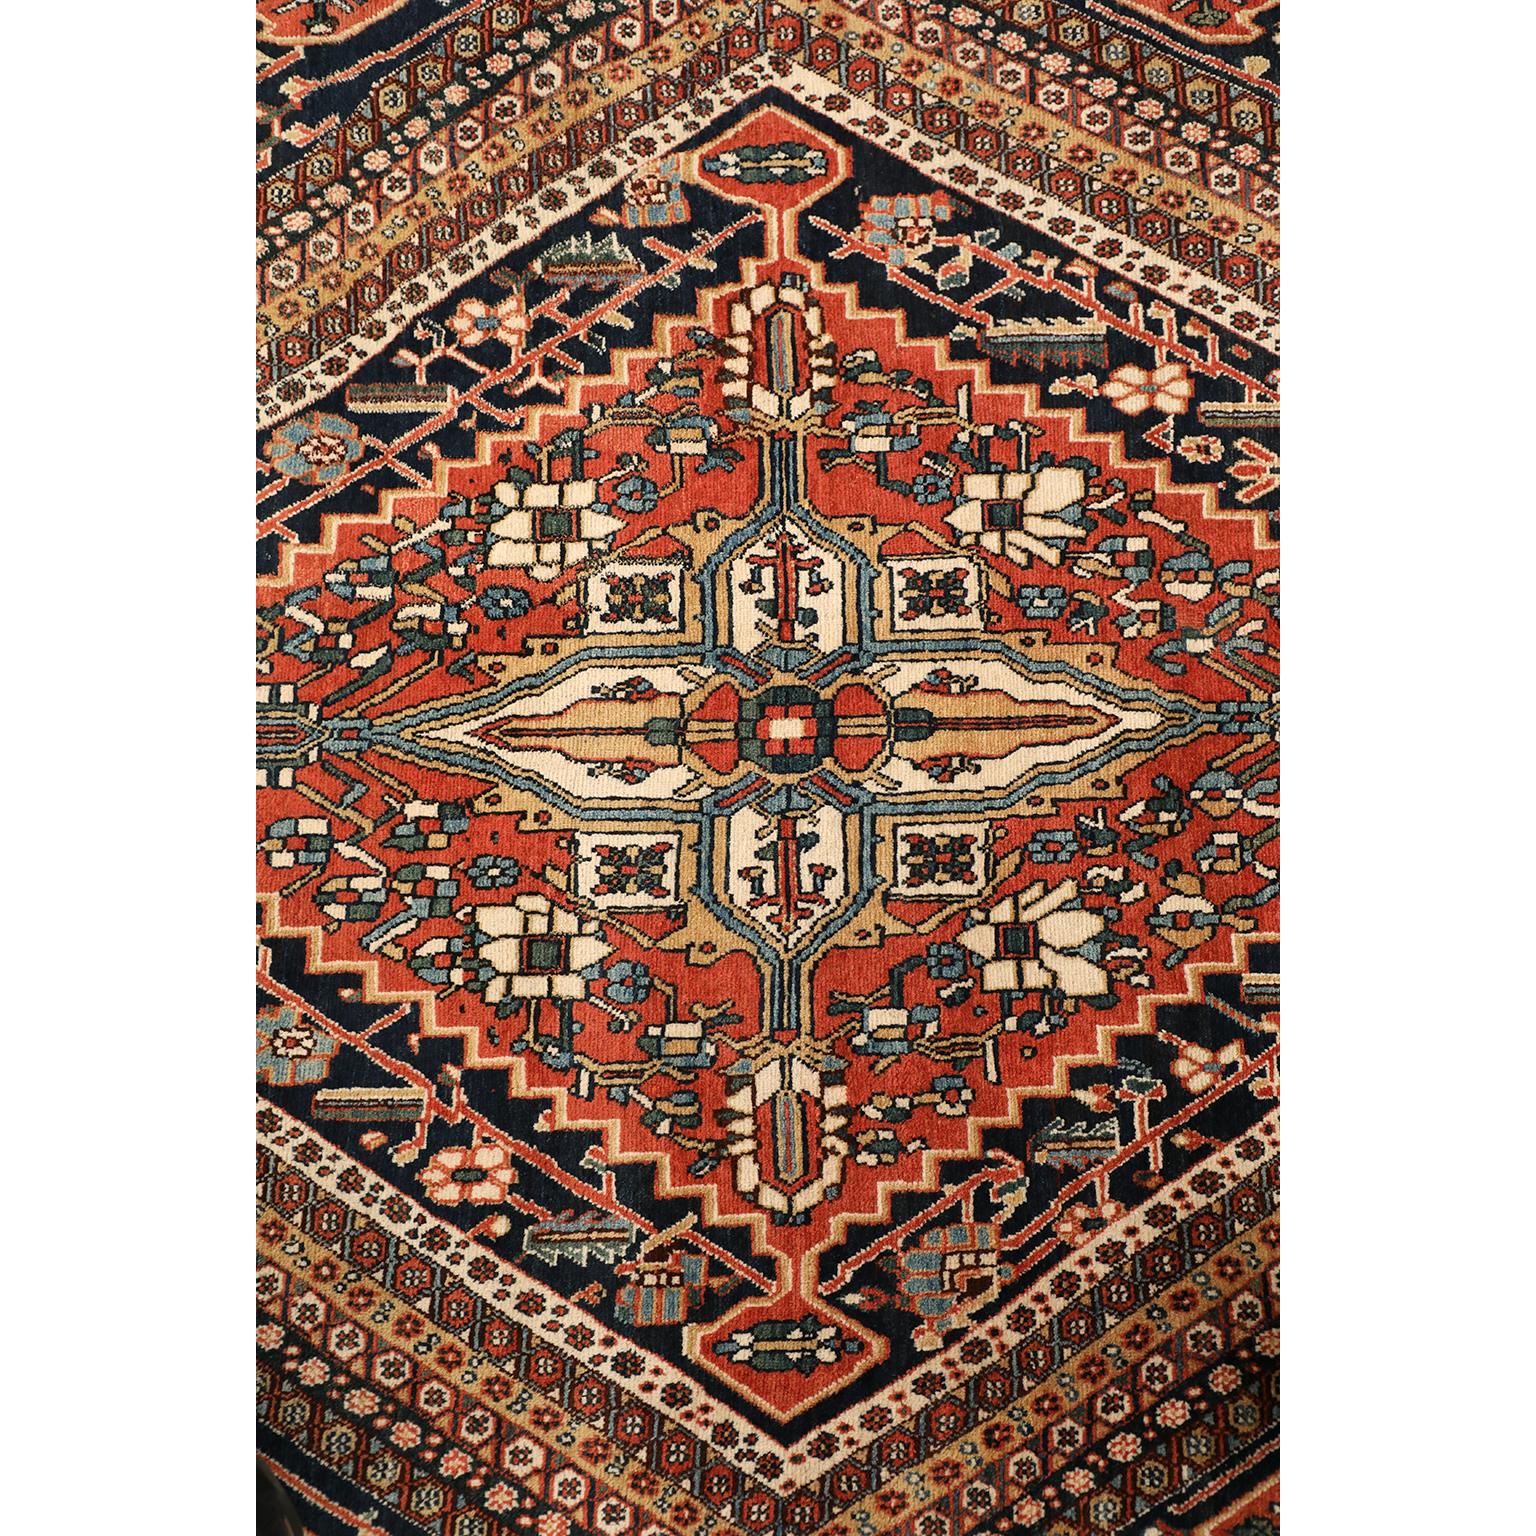 This Qashqai Persian carpet circa 1920 in pure wool and vegetable dyes features an overall rhombic garden design with multiple bands designating both the central field pattern and border. Organic red, light blue, green and gold colors are balanced